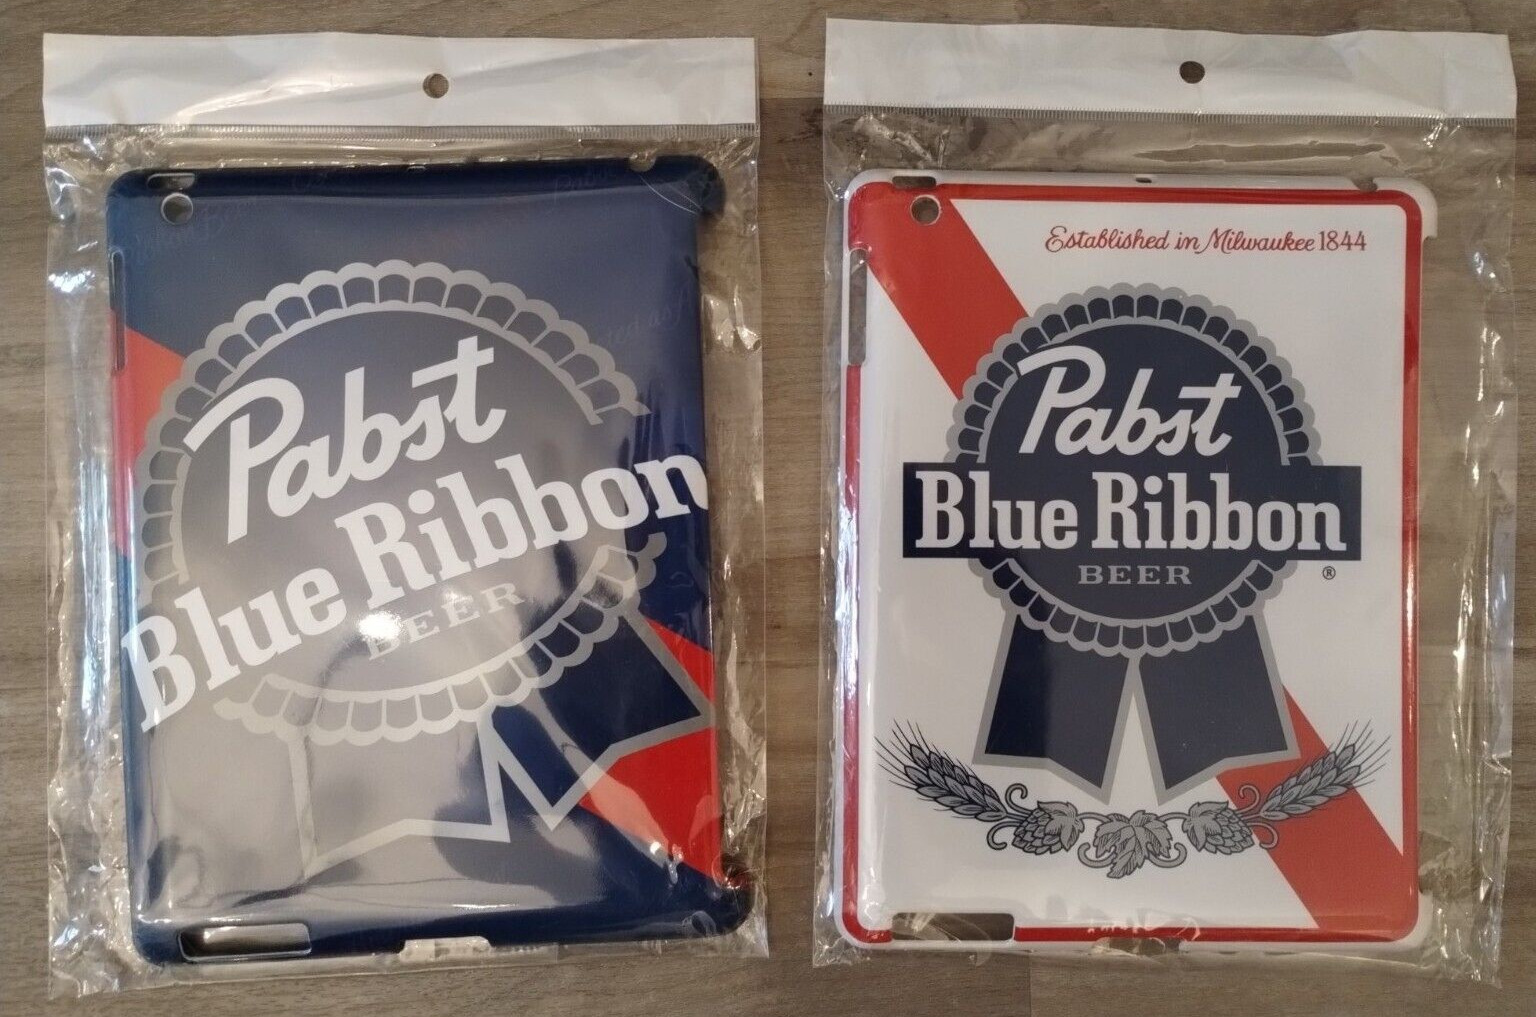 New Lot of 2 Pabst Blue Ribbon iPad shell cases - Limited promo items PBR Beer